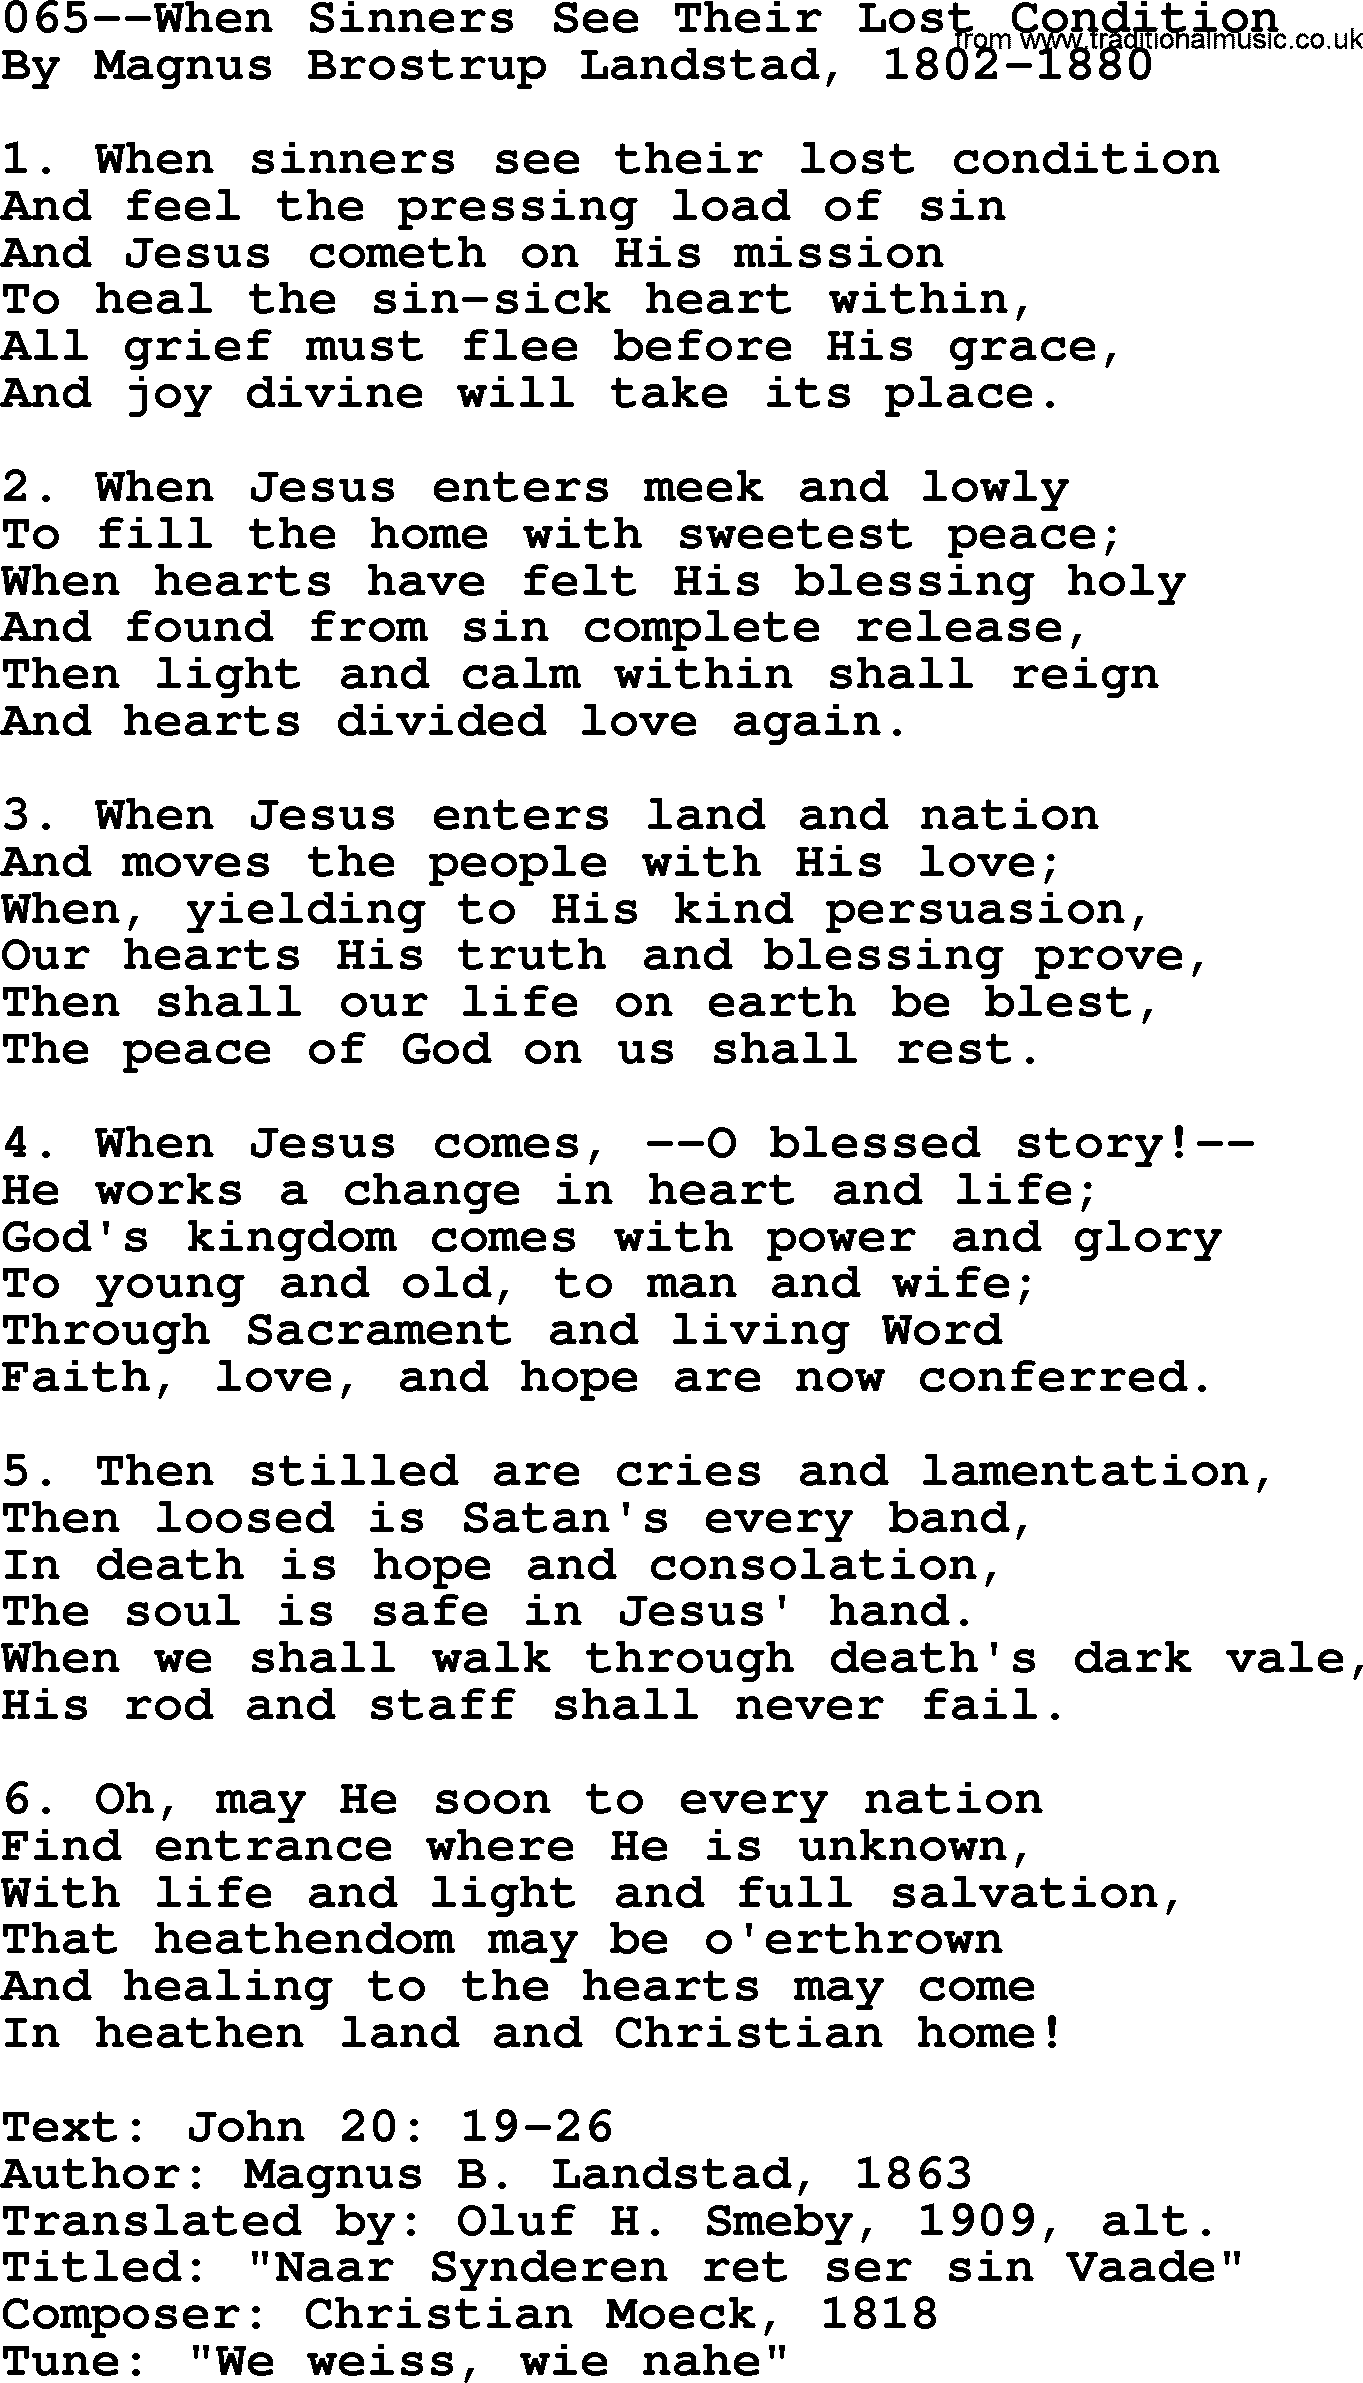 Lutheran Hymn: 065--When Sinners See Their Lost Condition.txt lyrics with PDF